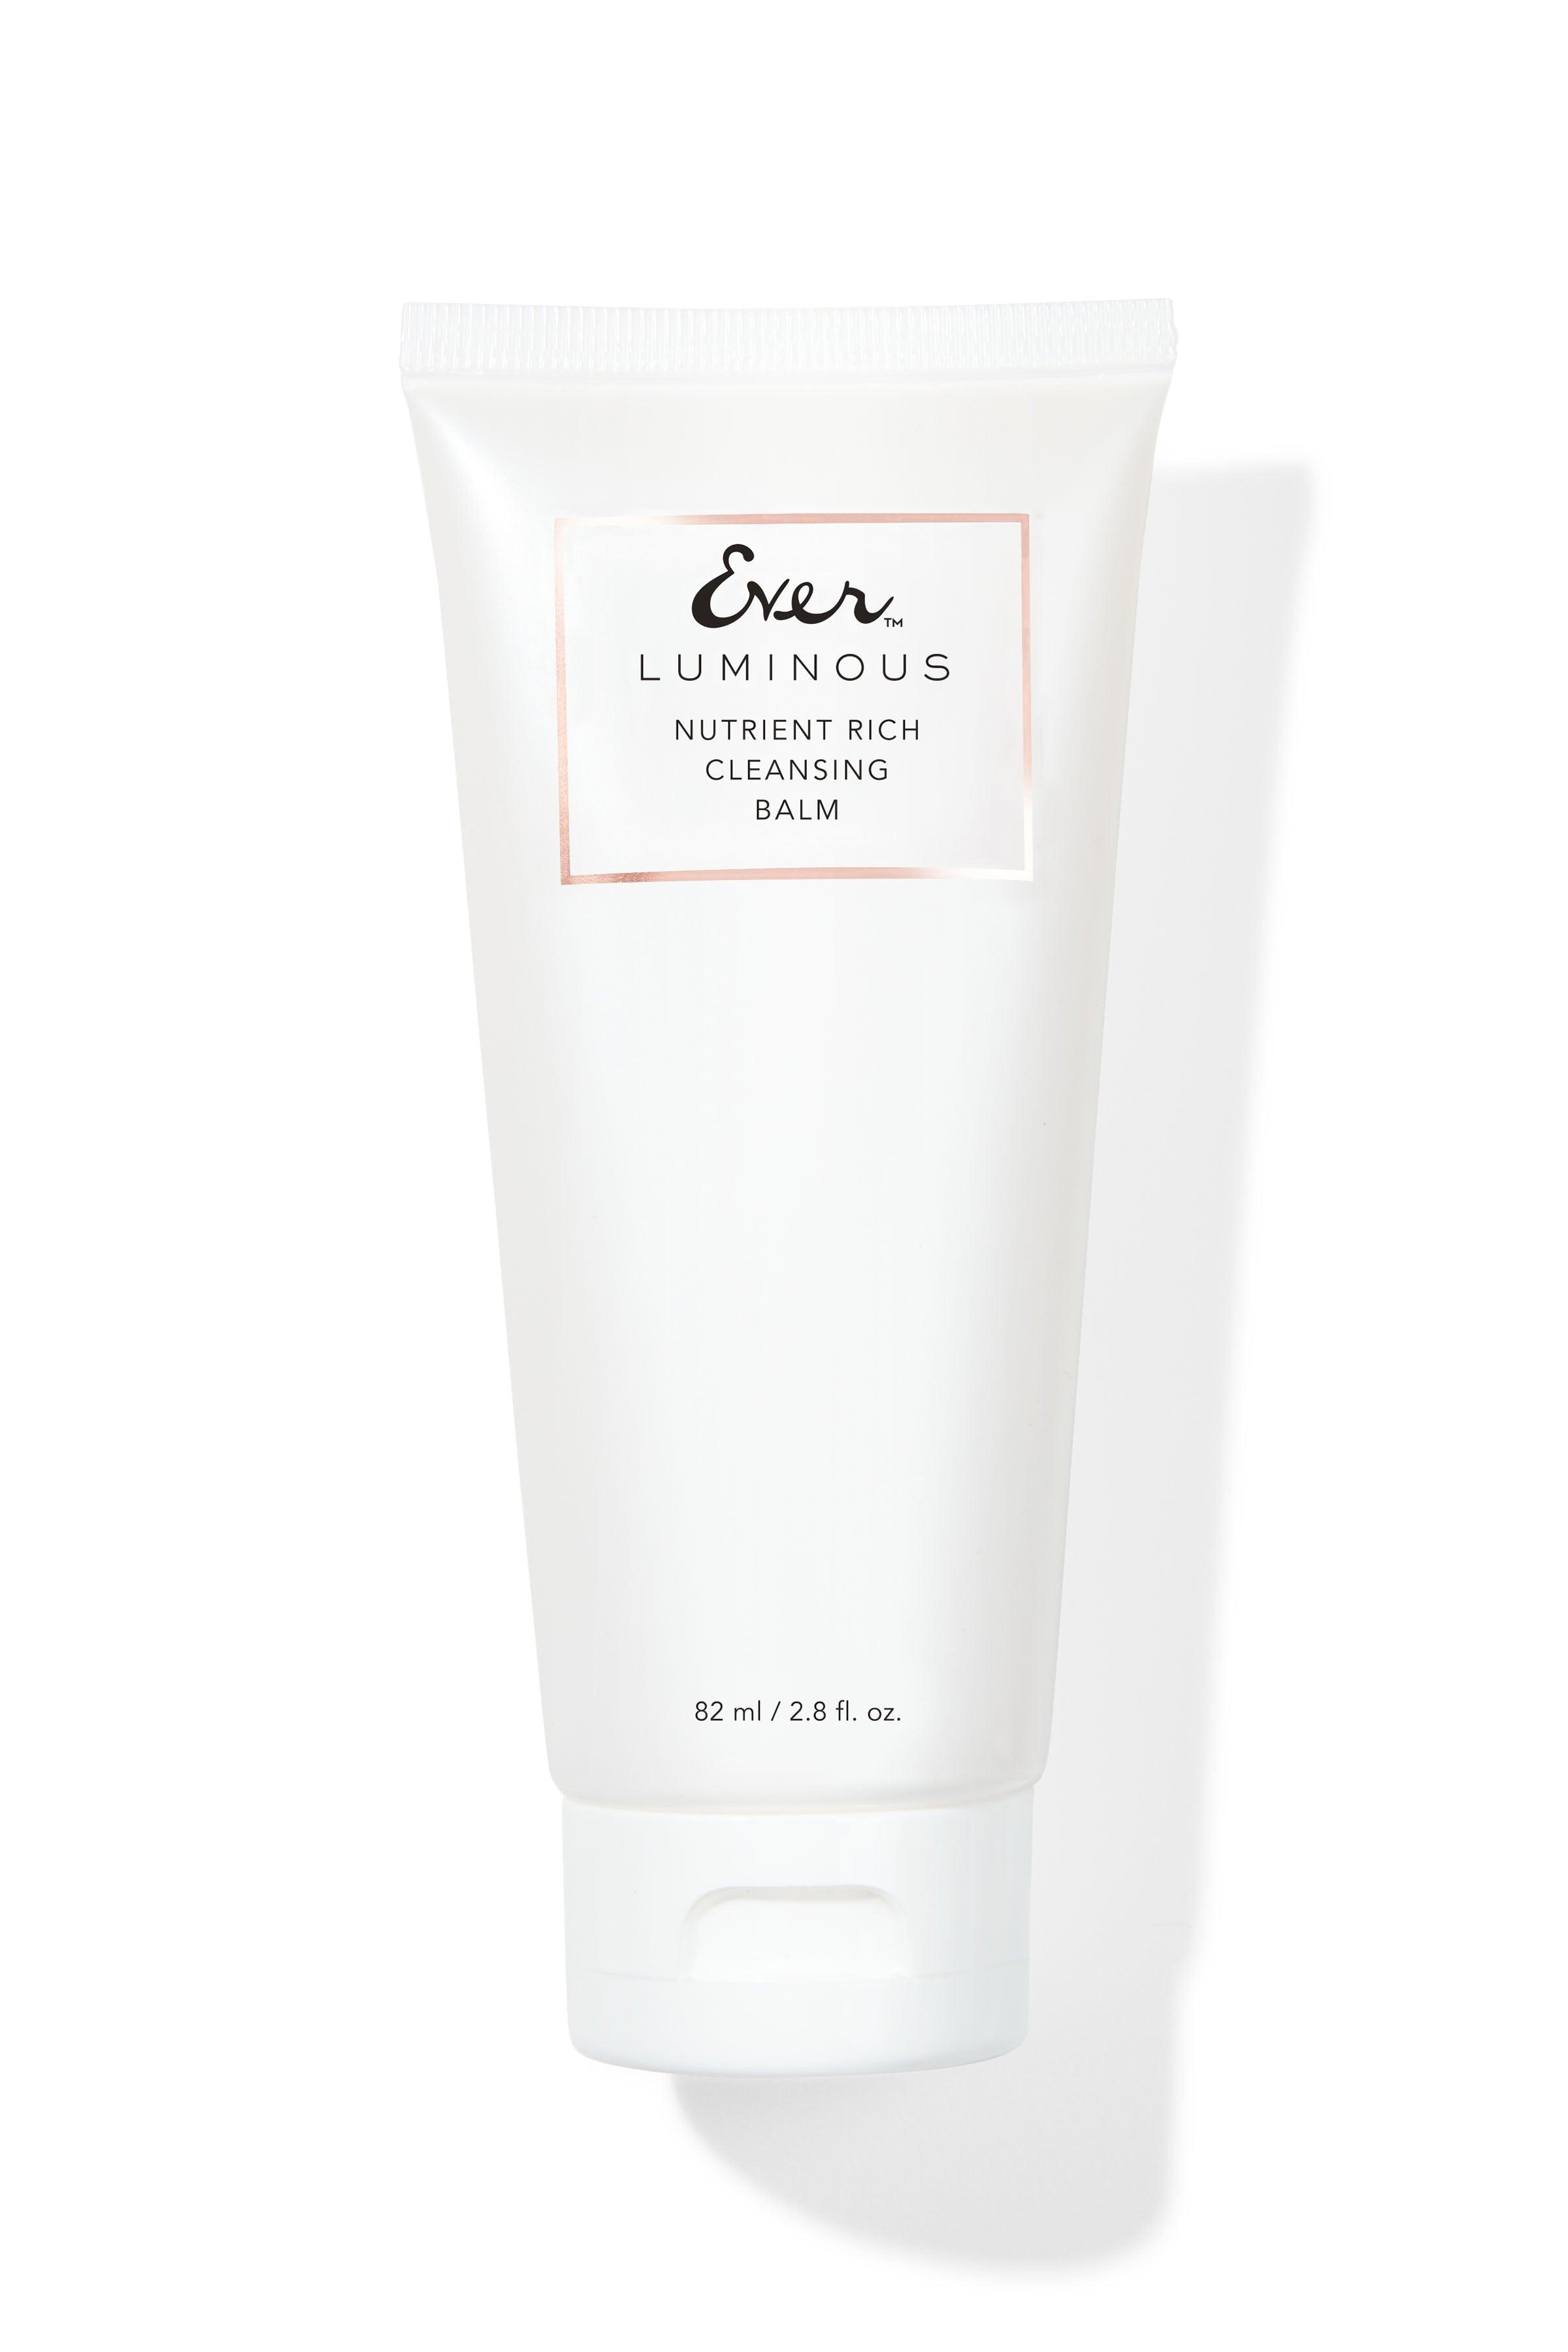 LUMINOUS Nutrient-Rich Cleansing Balm (Dry Skin) - EVER